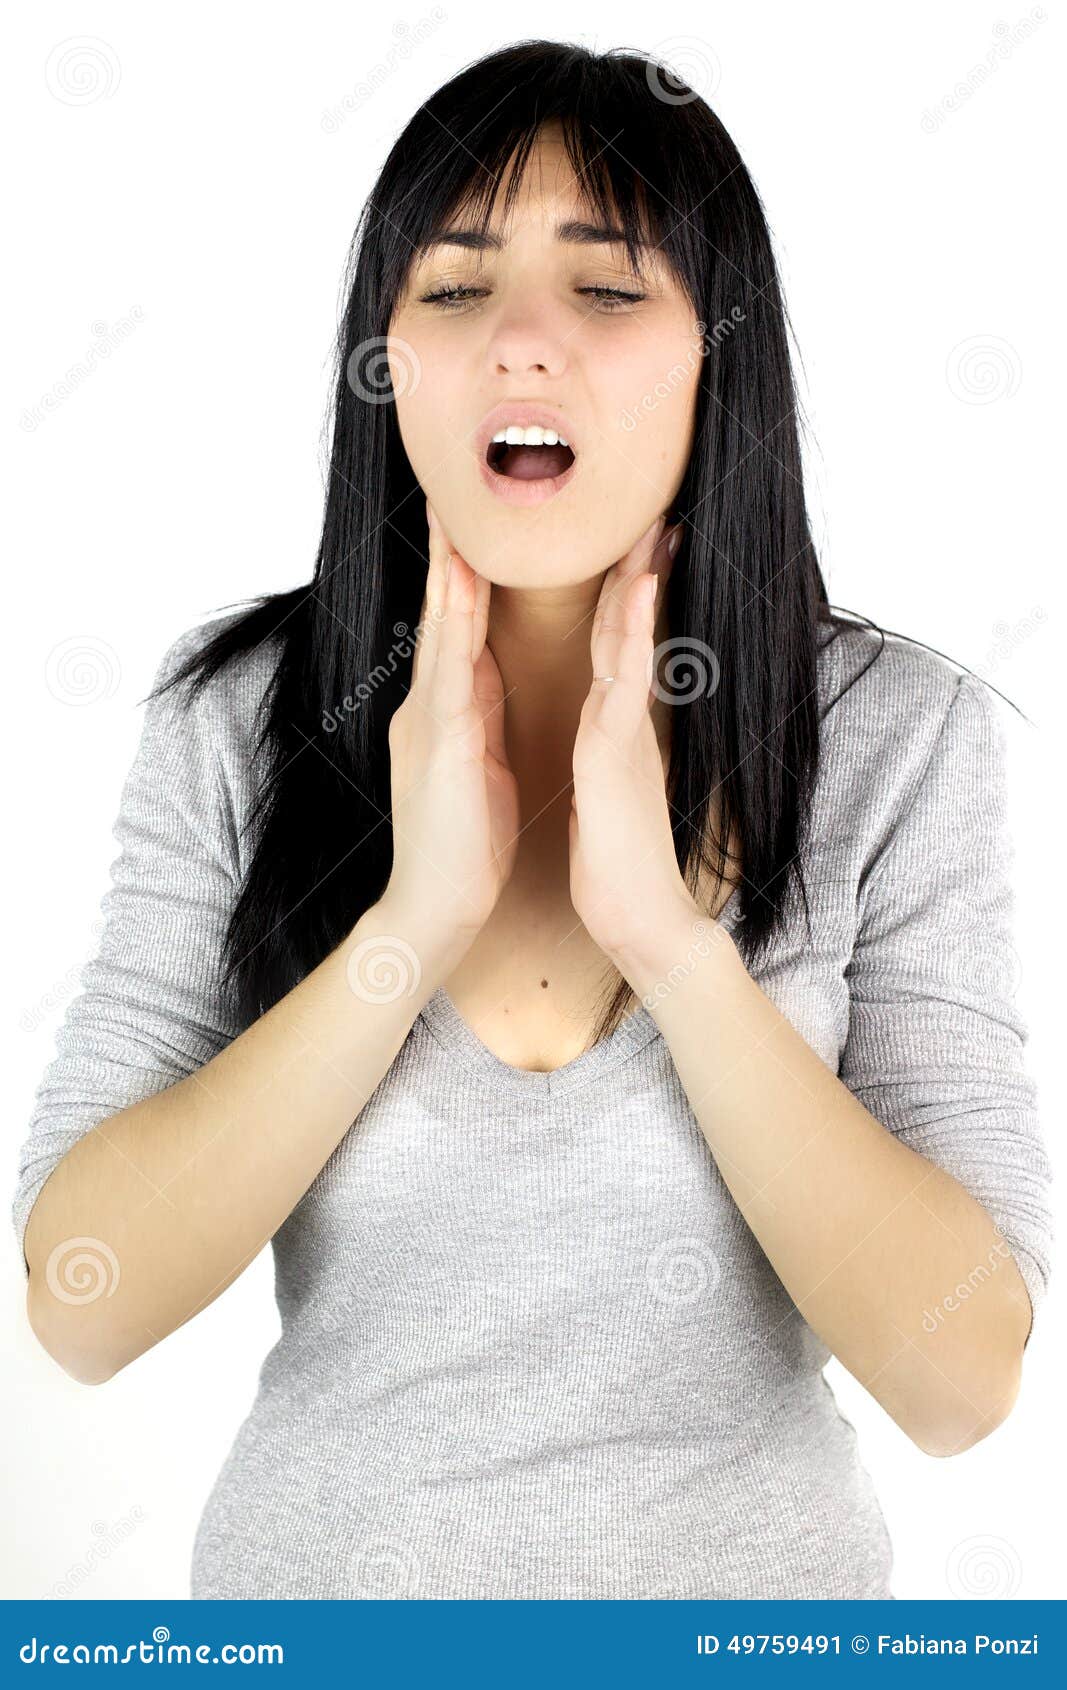 Woman Having Lost Voice Touching Throat Stock Image - Image of human ...